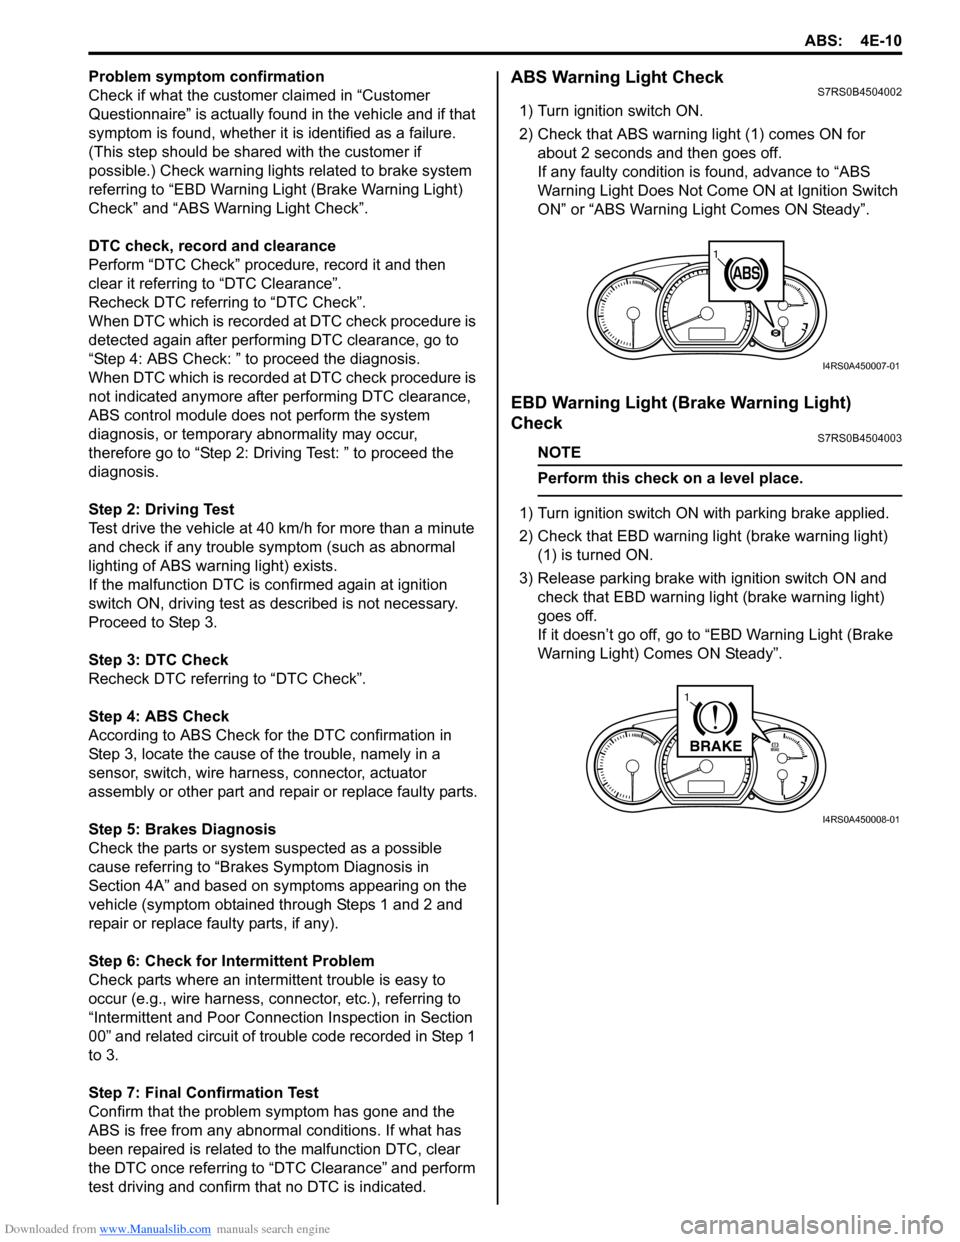 SUZUKI SWIFT 2005 2.G Service Workshop Manual Downloaded from www.Manualslib.com manuals search engine ABS: 4E-10
Problem symptom confirmation
Check if what the customer claimed in “Customer 
Questionnaire” is actually found in the vehicle an